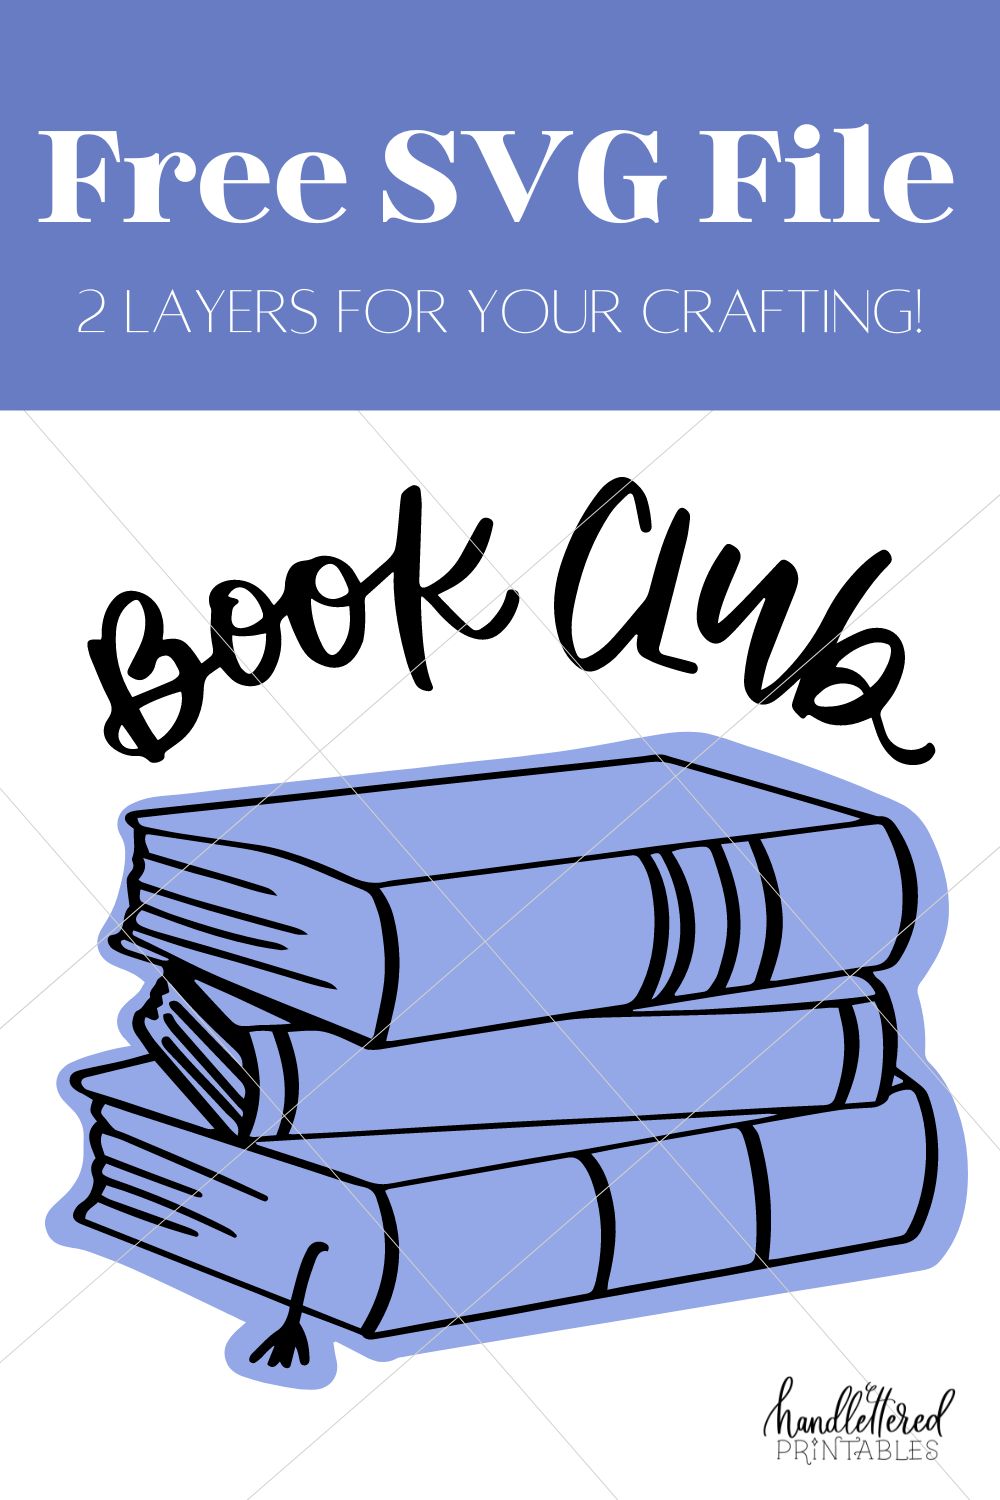 Stack of books free SVG file with 'book club' hand lettering. Image shows design on white background with title text reading 'free SVG file with layers for your crafting'